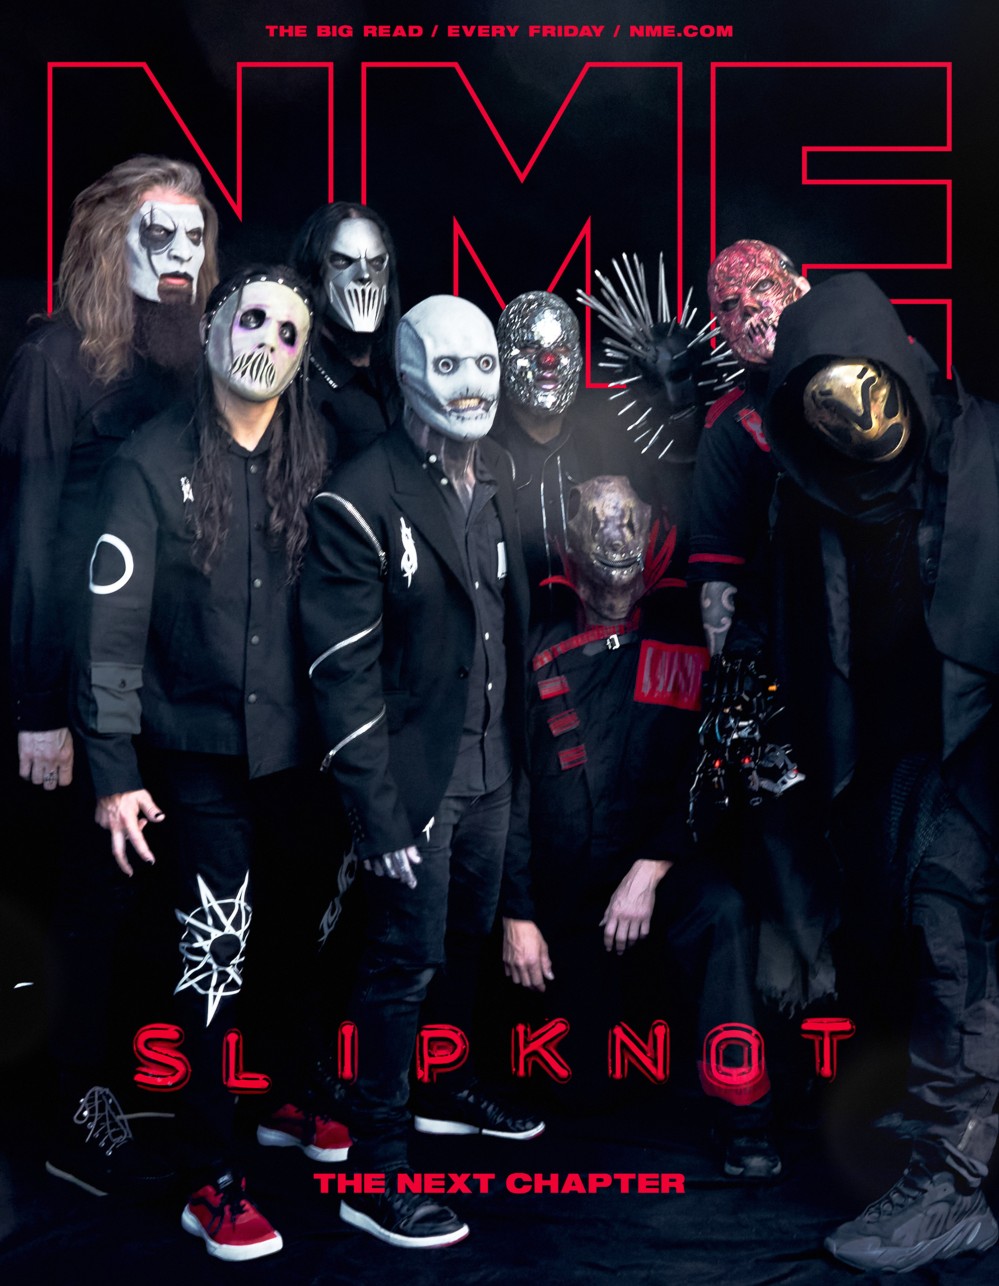 Slipknot on the cover of NME